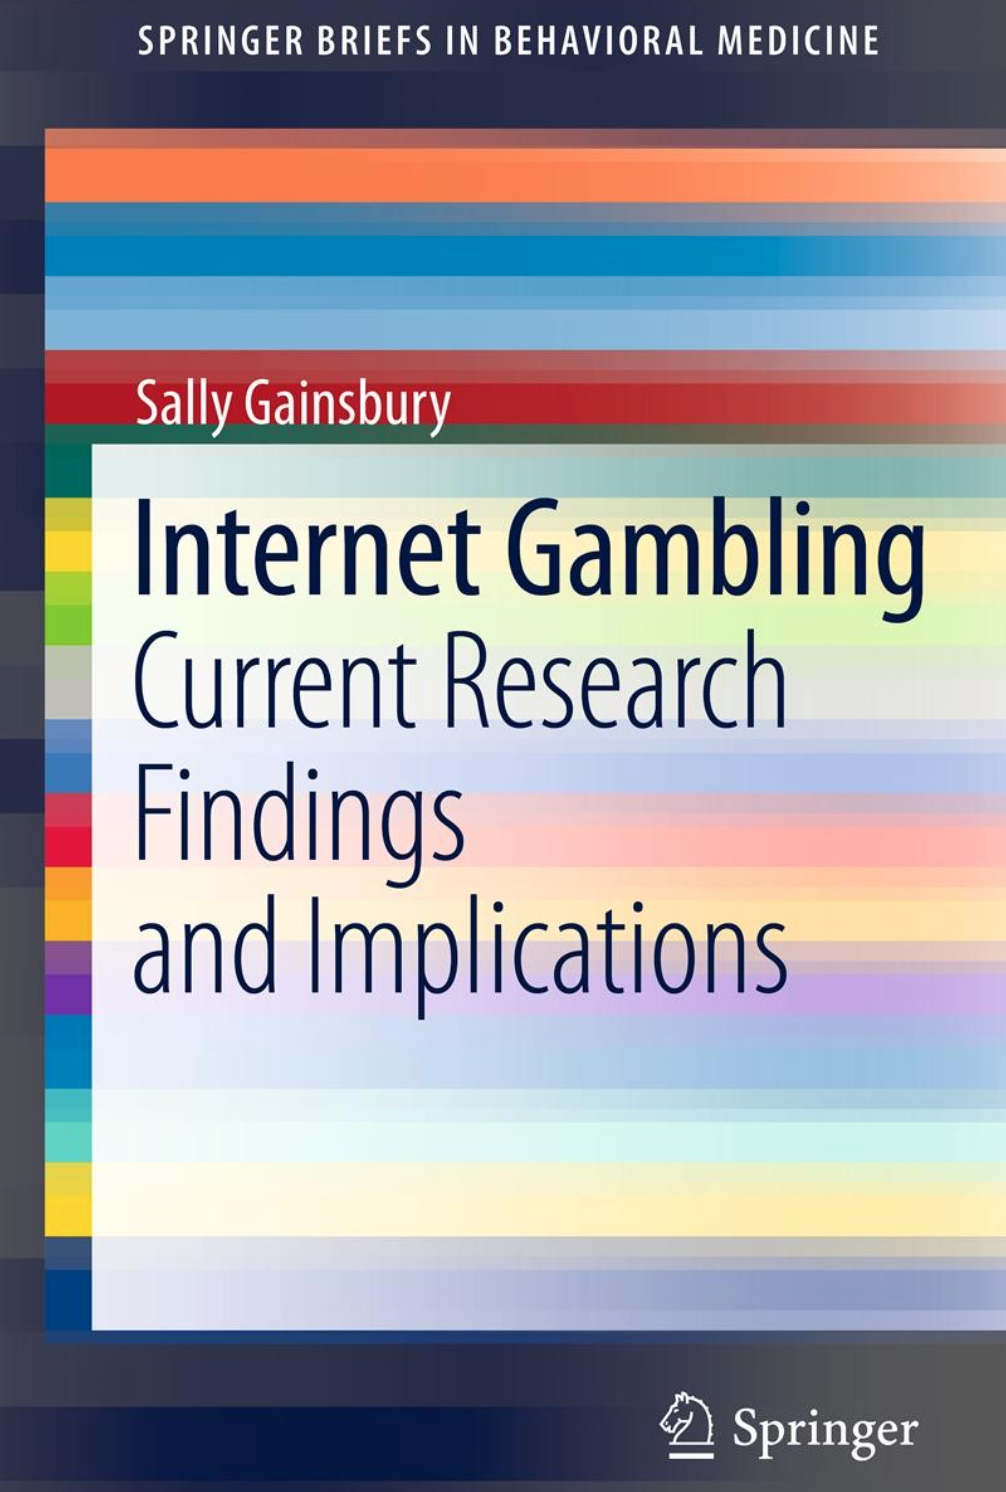 del libro Internet Gambling Current Research Findings and Implications di Sally Gainsbury